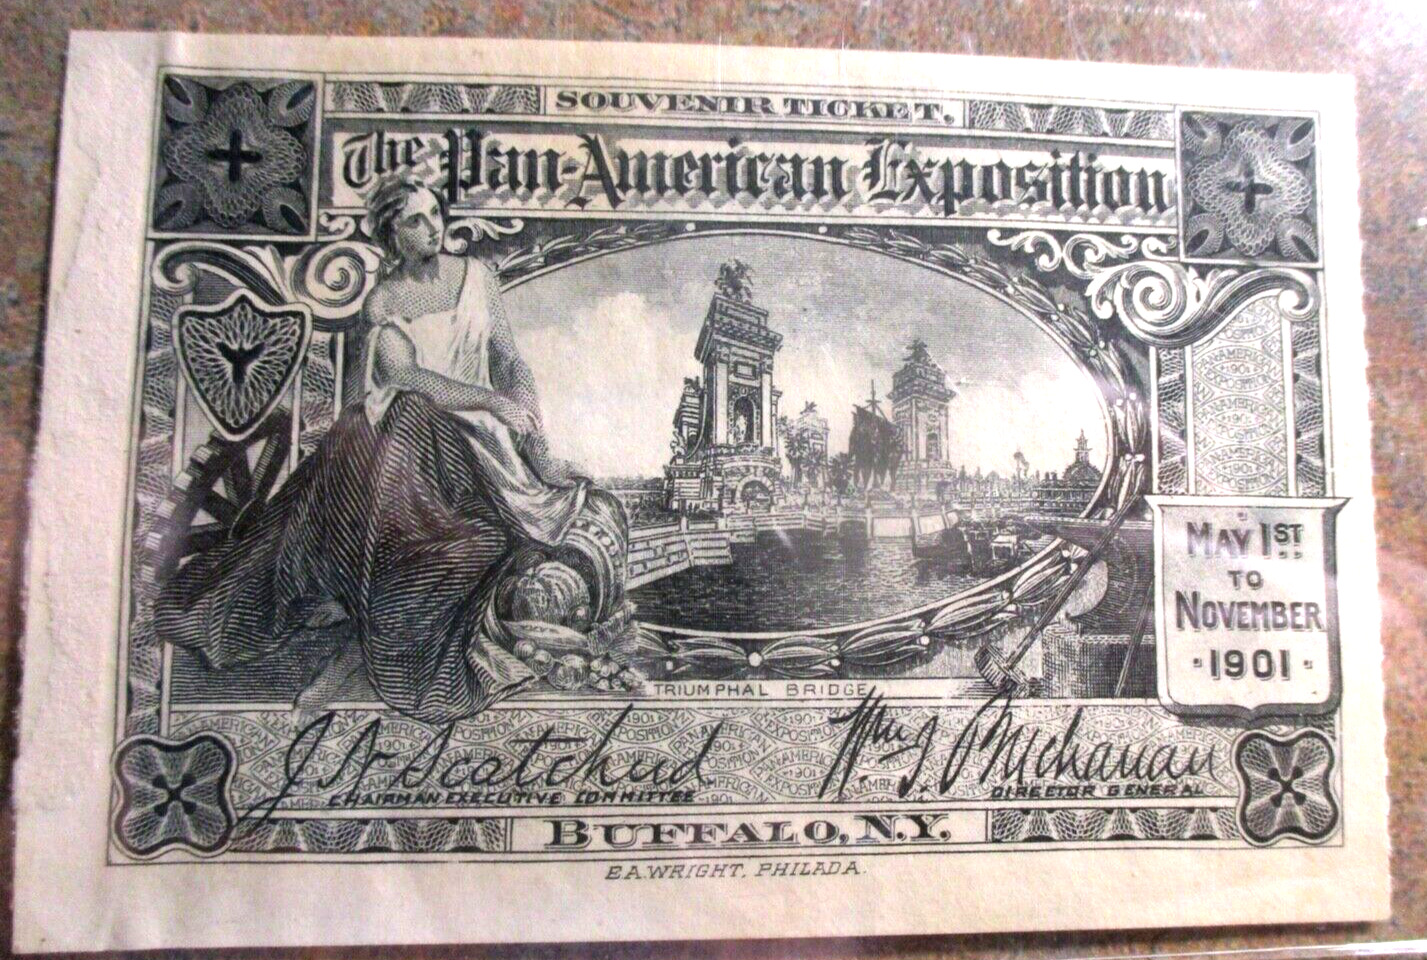 JUST ACQUIRED--1901 BUFFALO WORLD'S FAIR, SECOND TICKET LISTED ON EBAY NOW